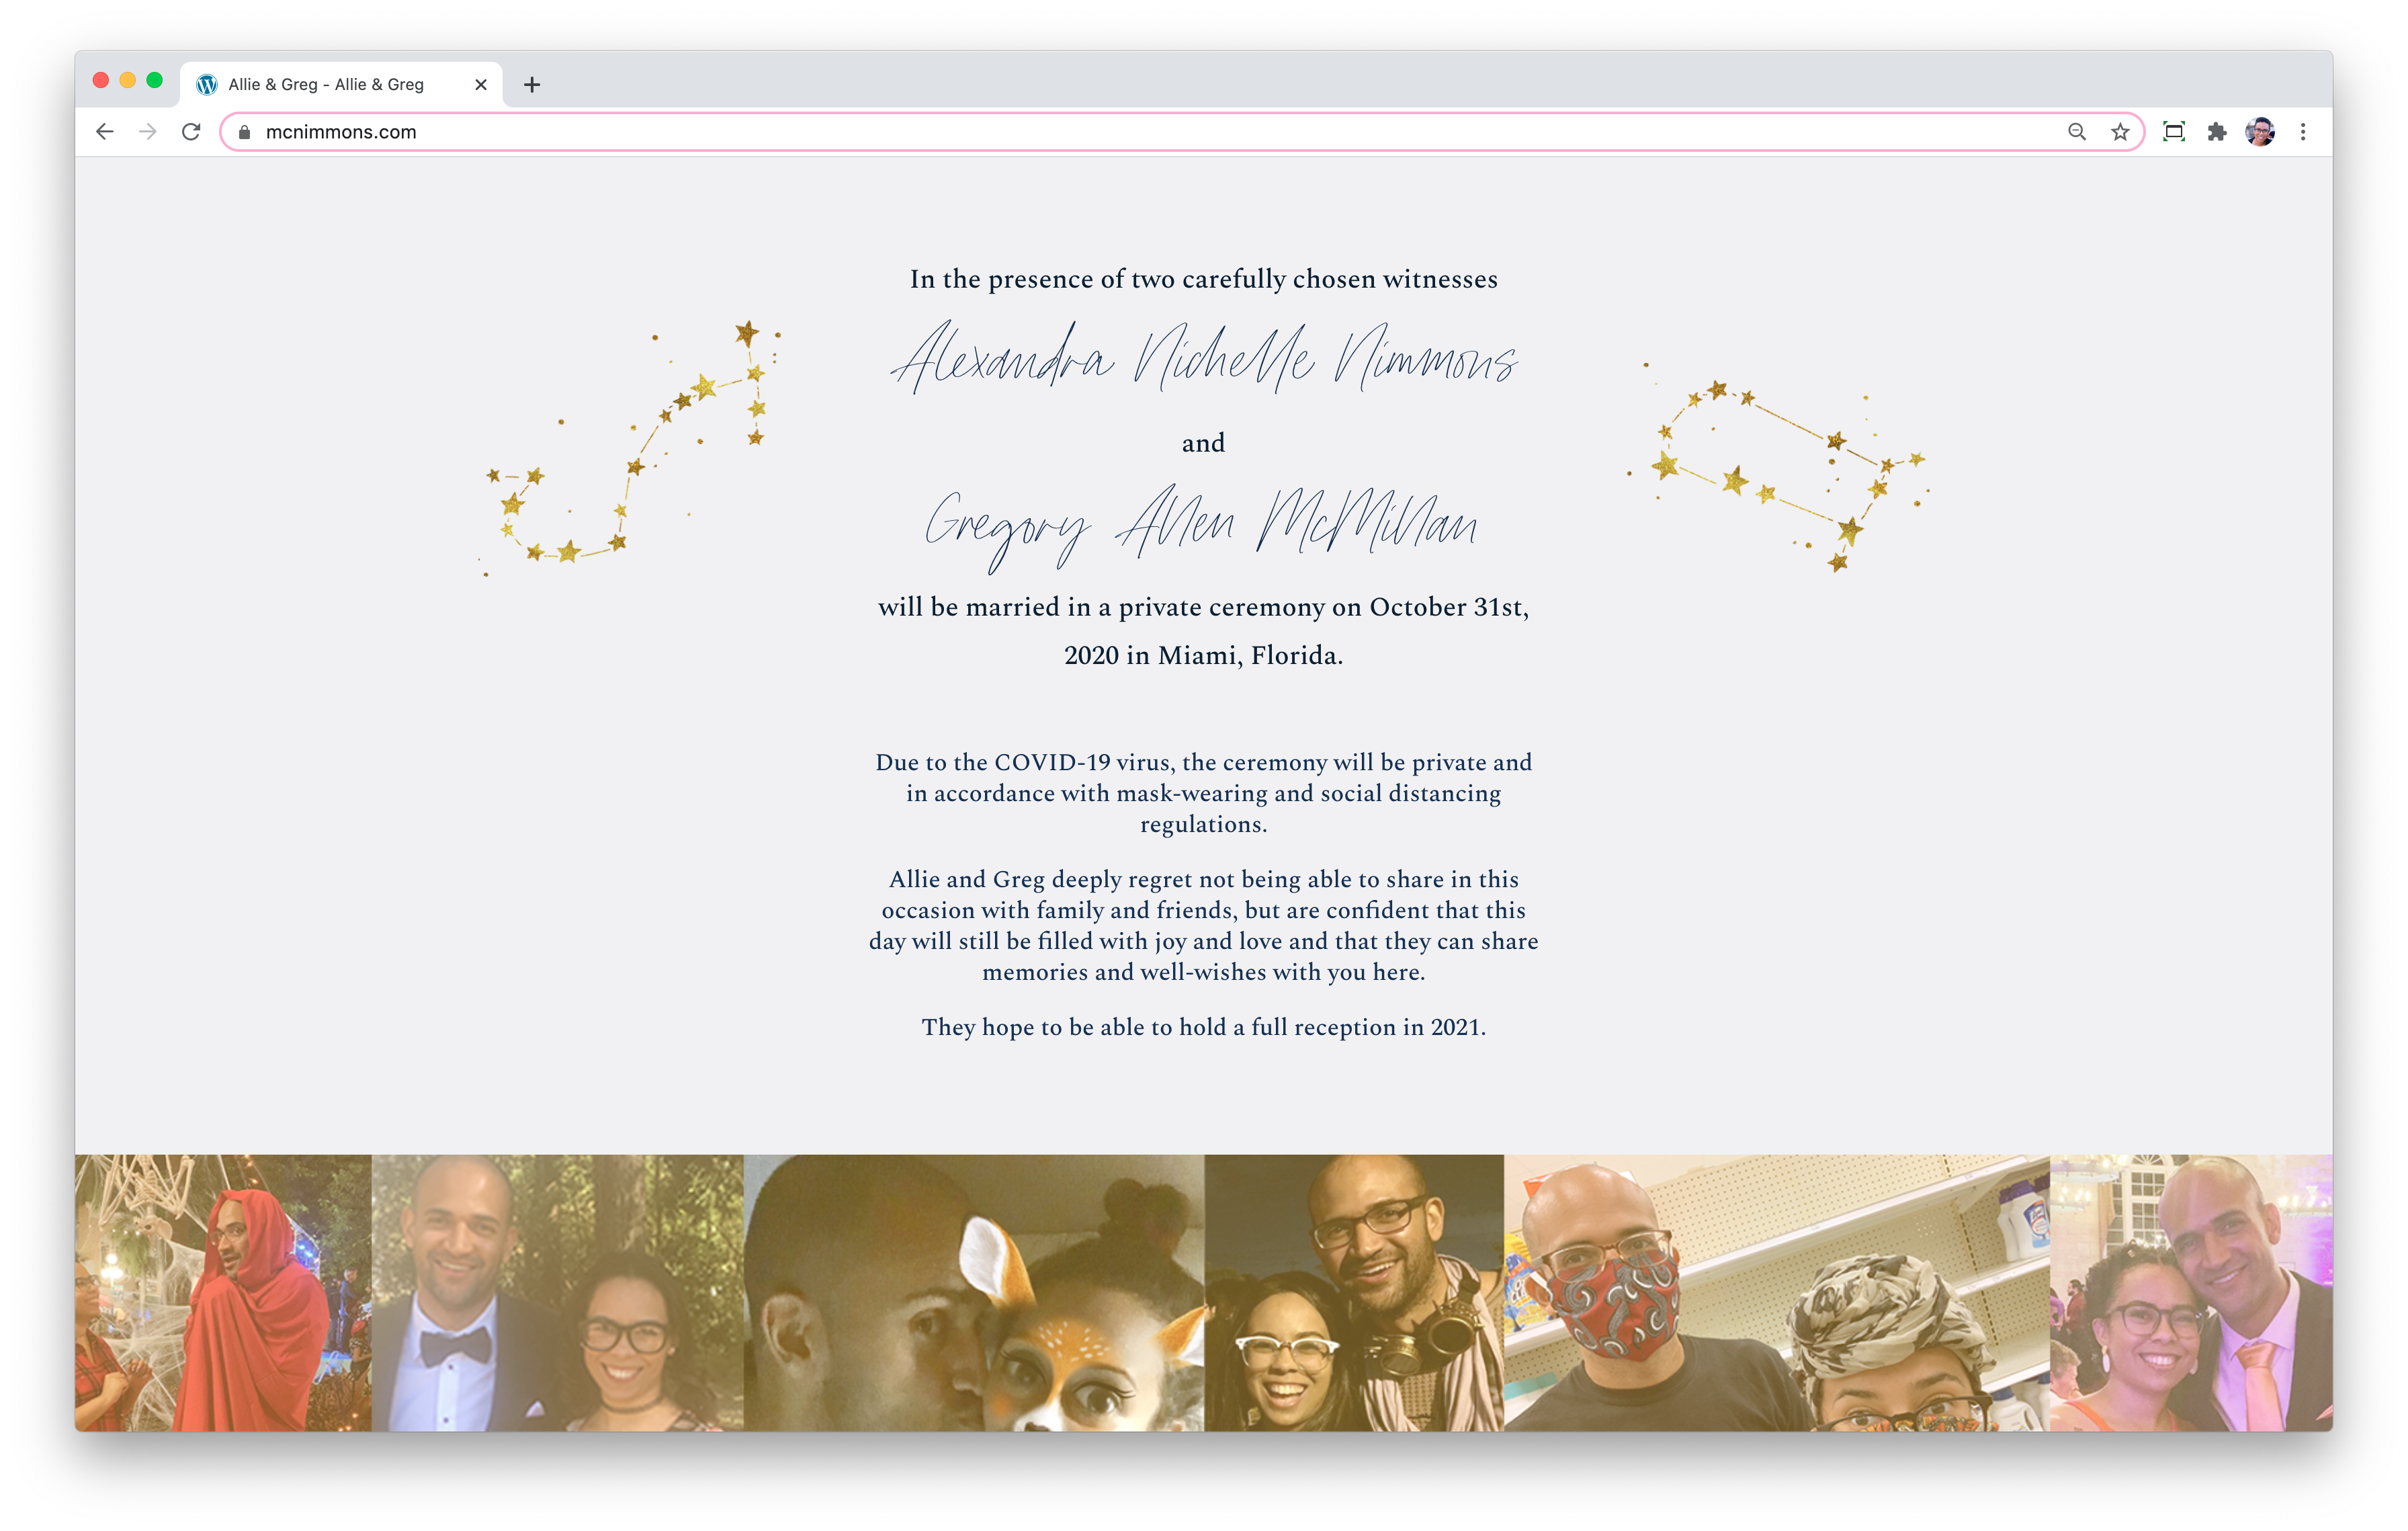 Allie and Greg's wedding website reflects the same designs as their invitations and explain the changes to their ceremony due to the COVID-19 pandemic.